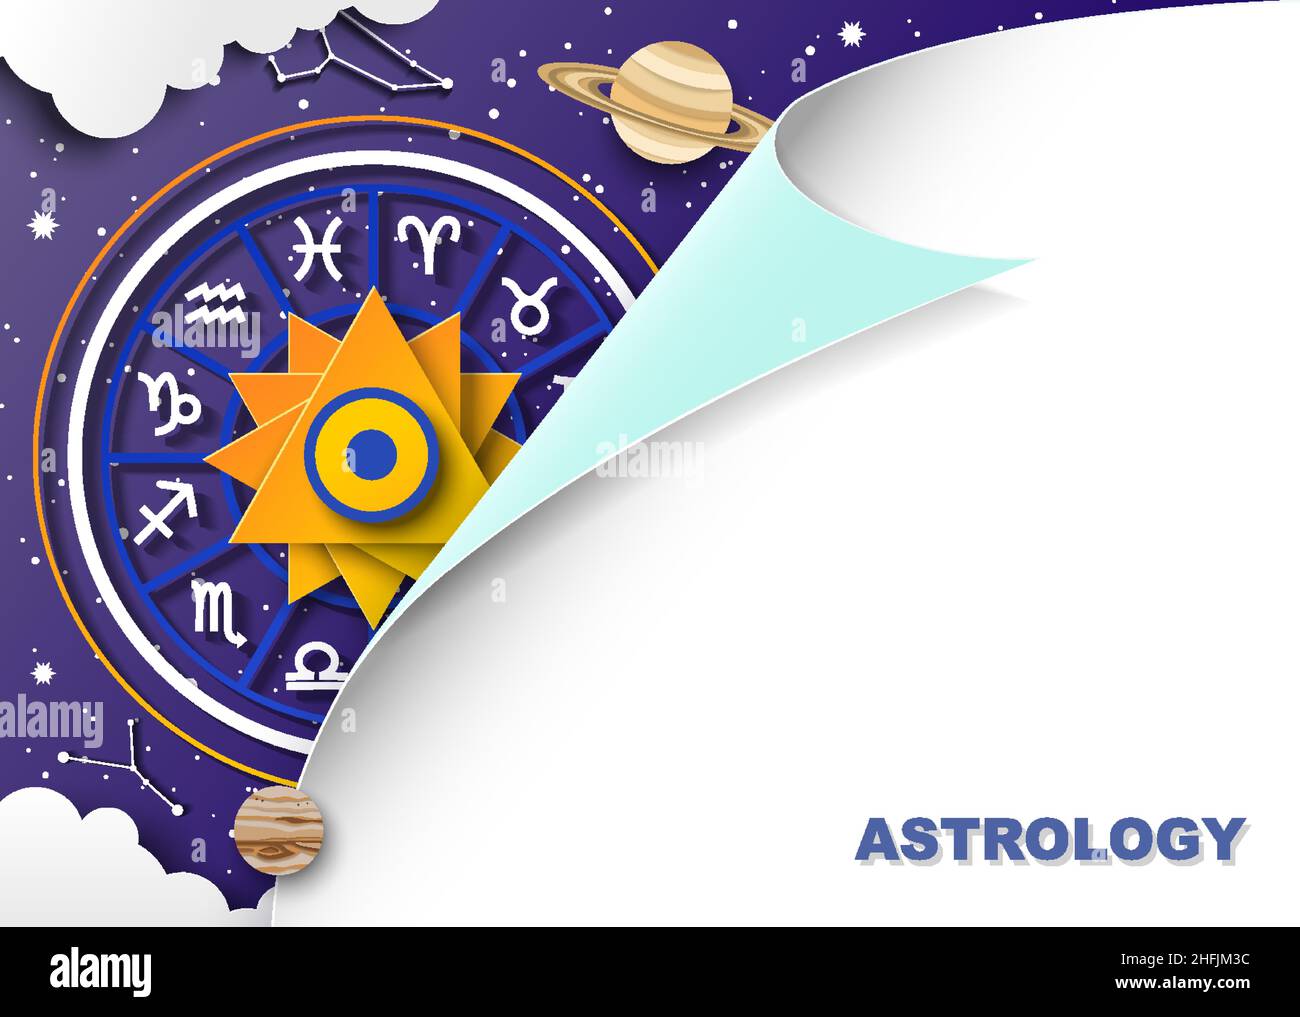 Zodiac wheel with twelve horoscope signs, planets, starry sky, constellations, vector paper cut illustration. Astrology. Stock Vector